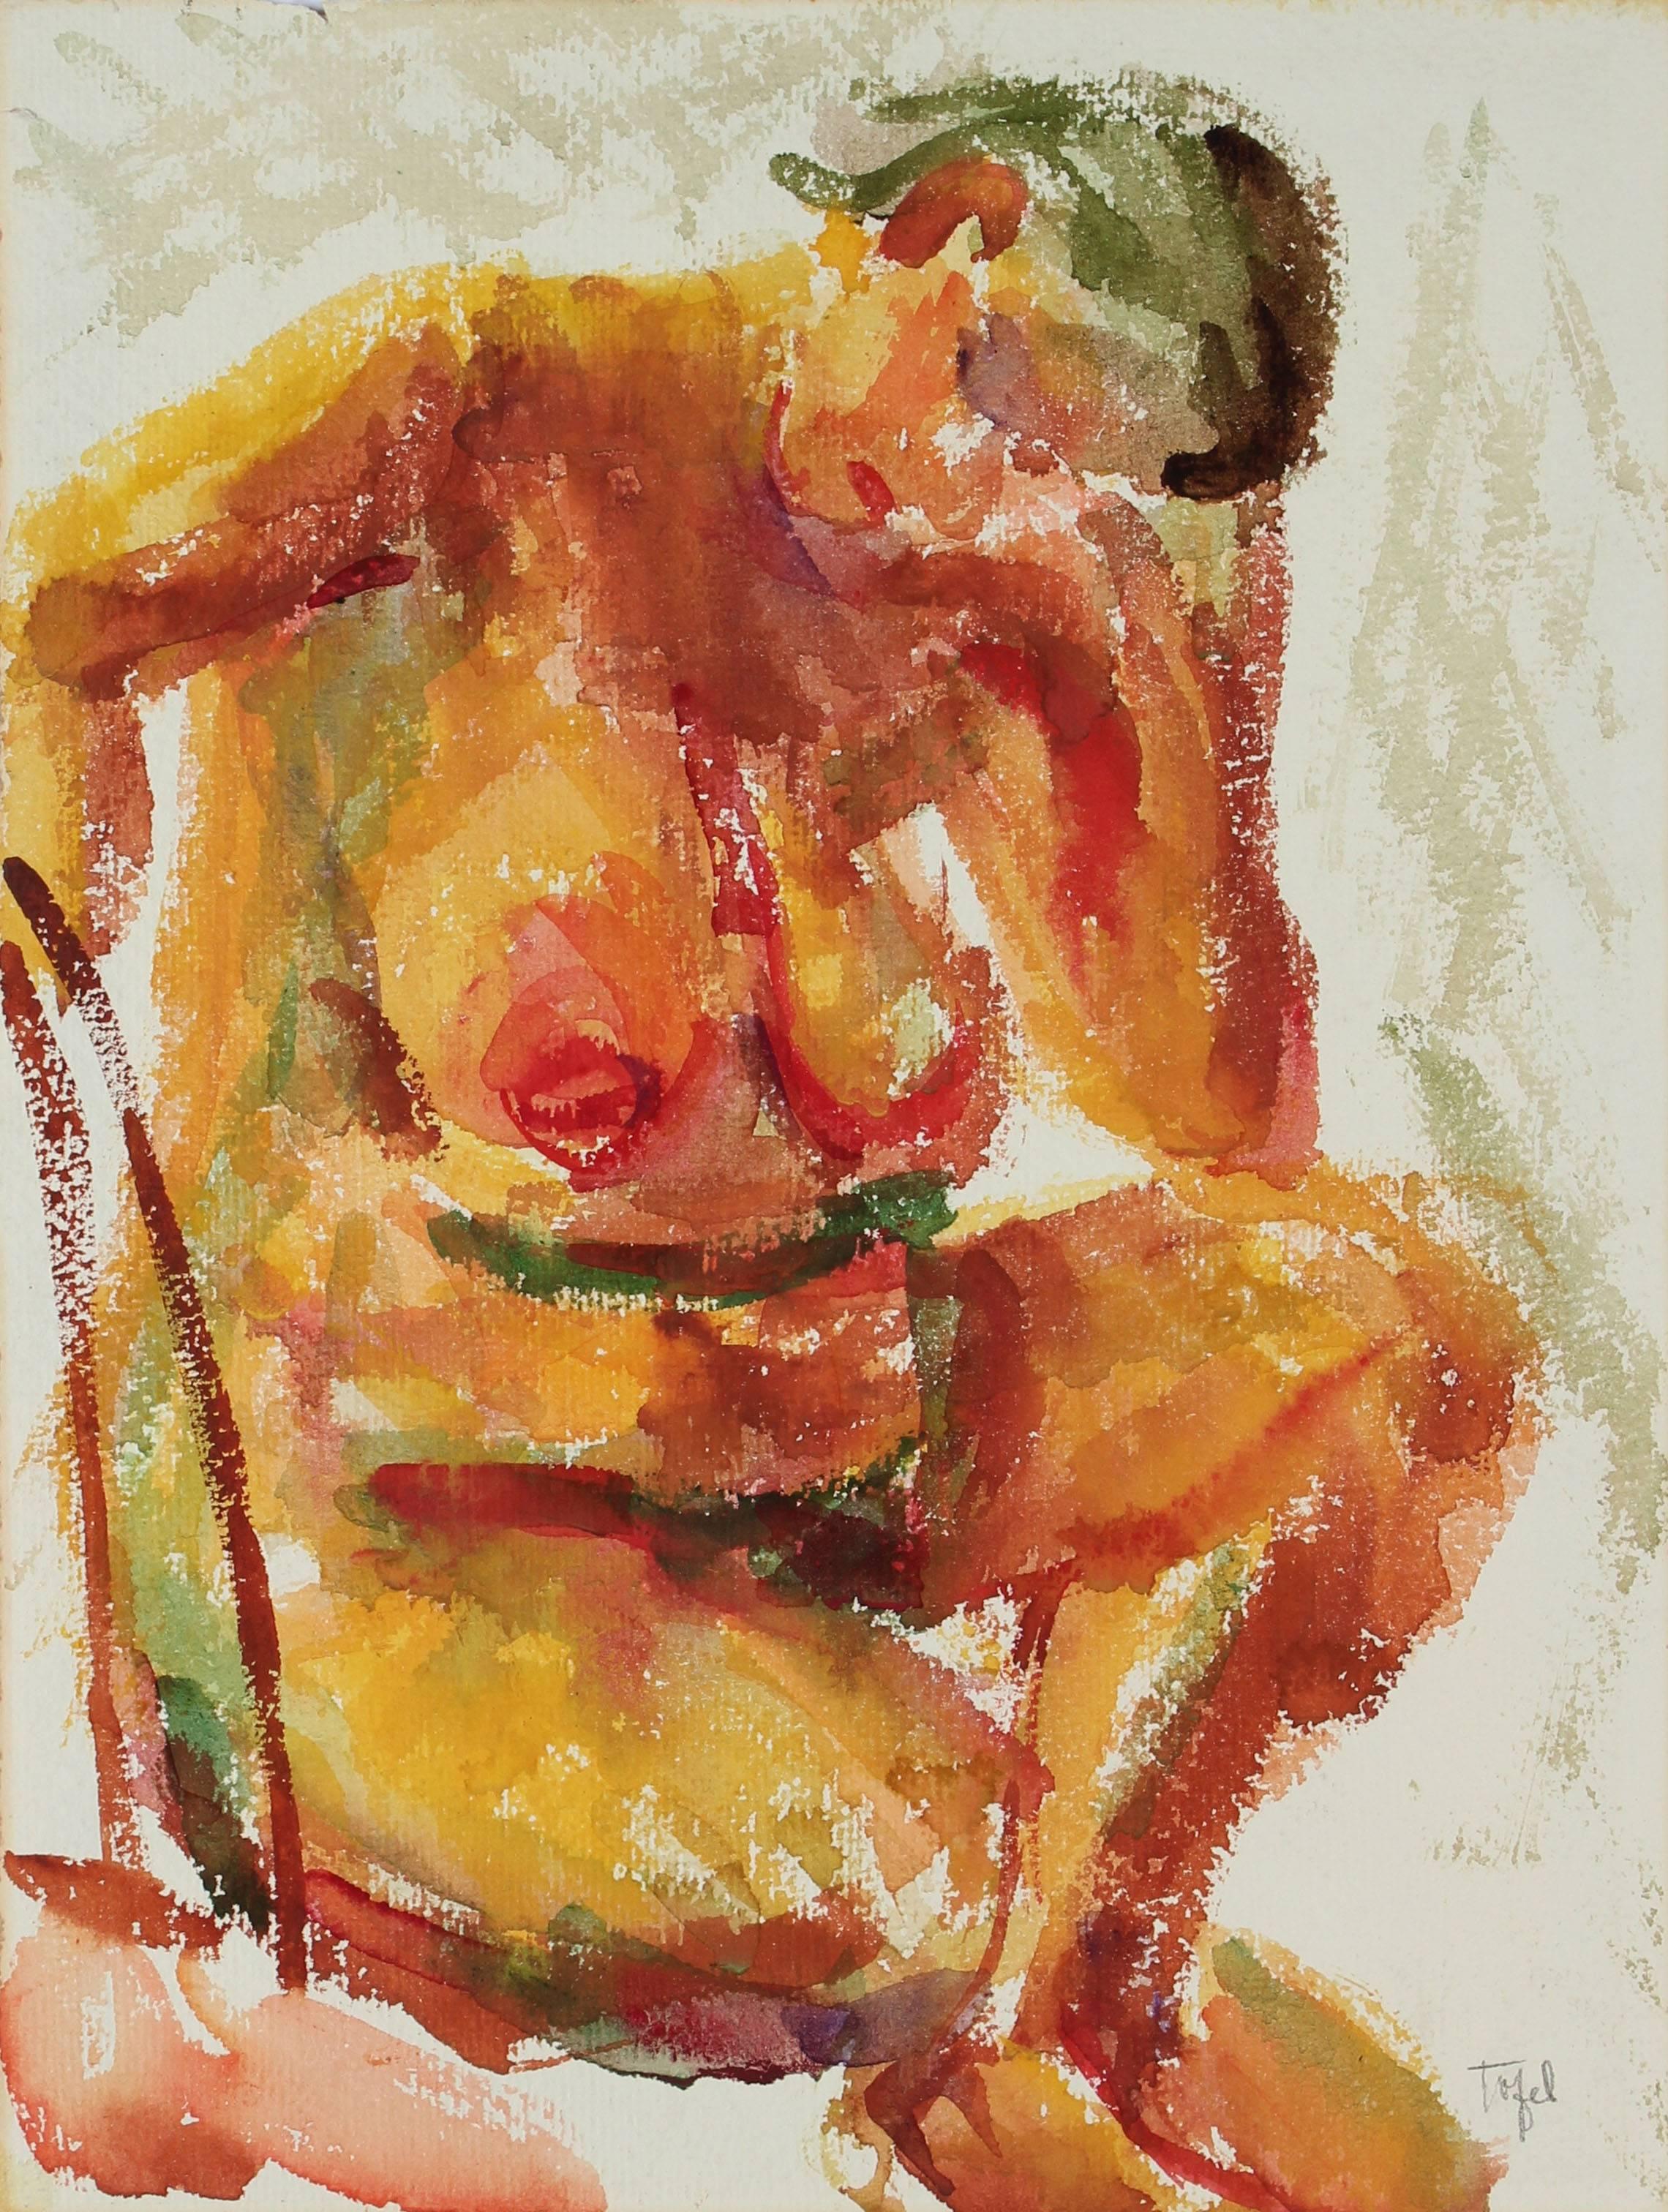 Seated Expressionist Figure in Watercolor, Circa 1950s